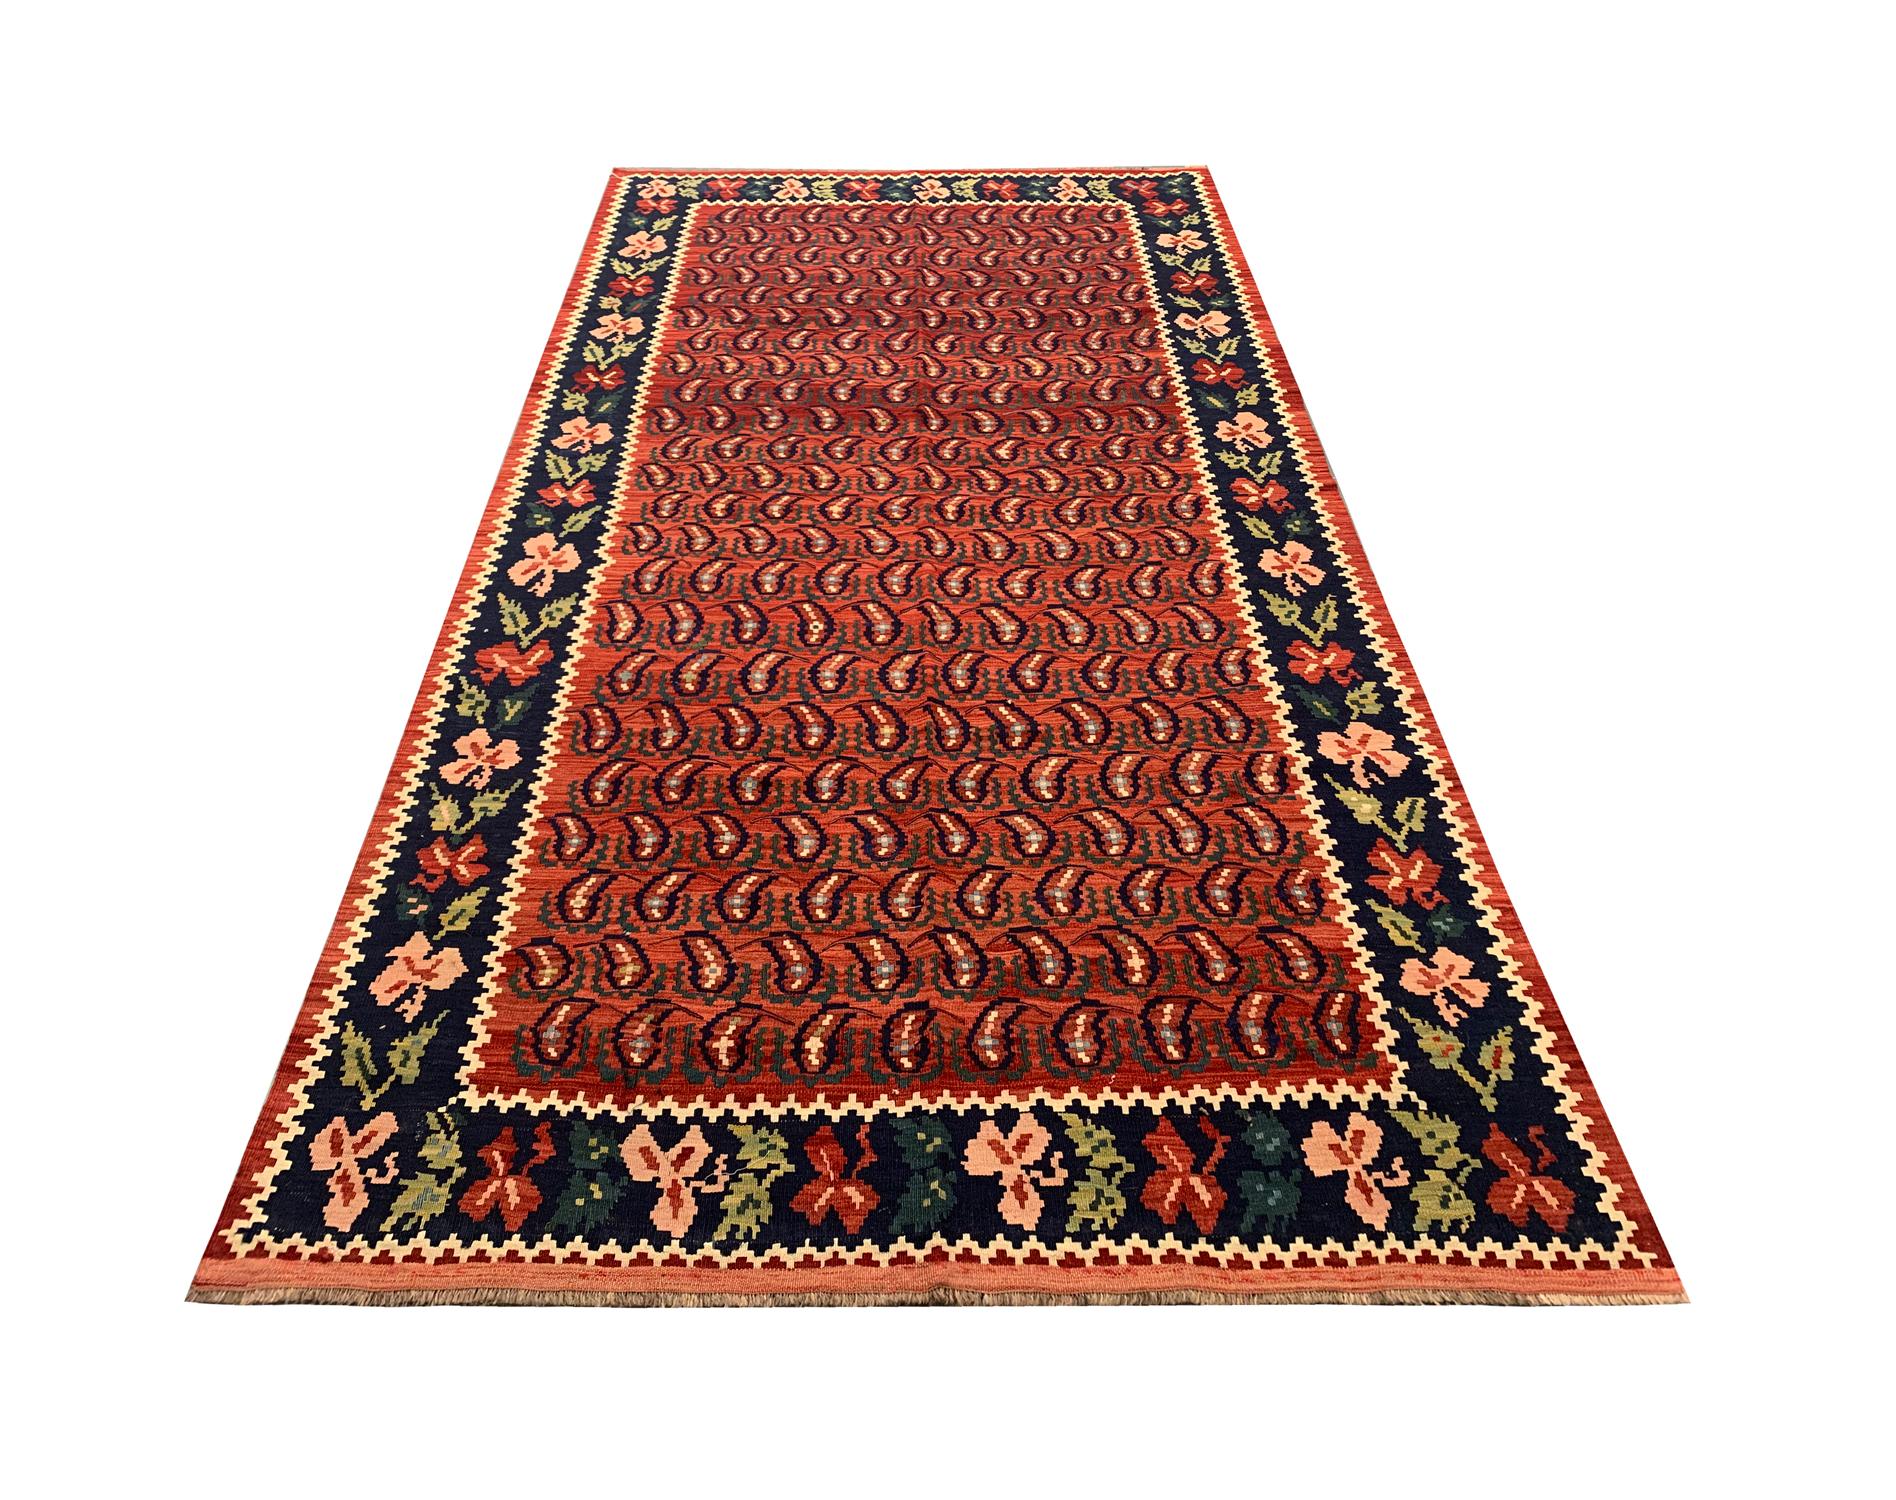 This beautiful Caucasian Karabagh Kilim rug has been woven by hand with fine hand-spun wool. The rich colours in this piece come from natural dyeing techniques which have been used for generations. An all-over repeat pattern covers the red field in